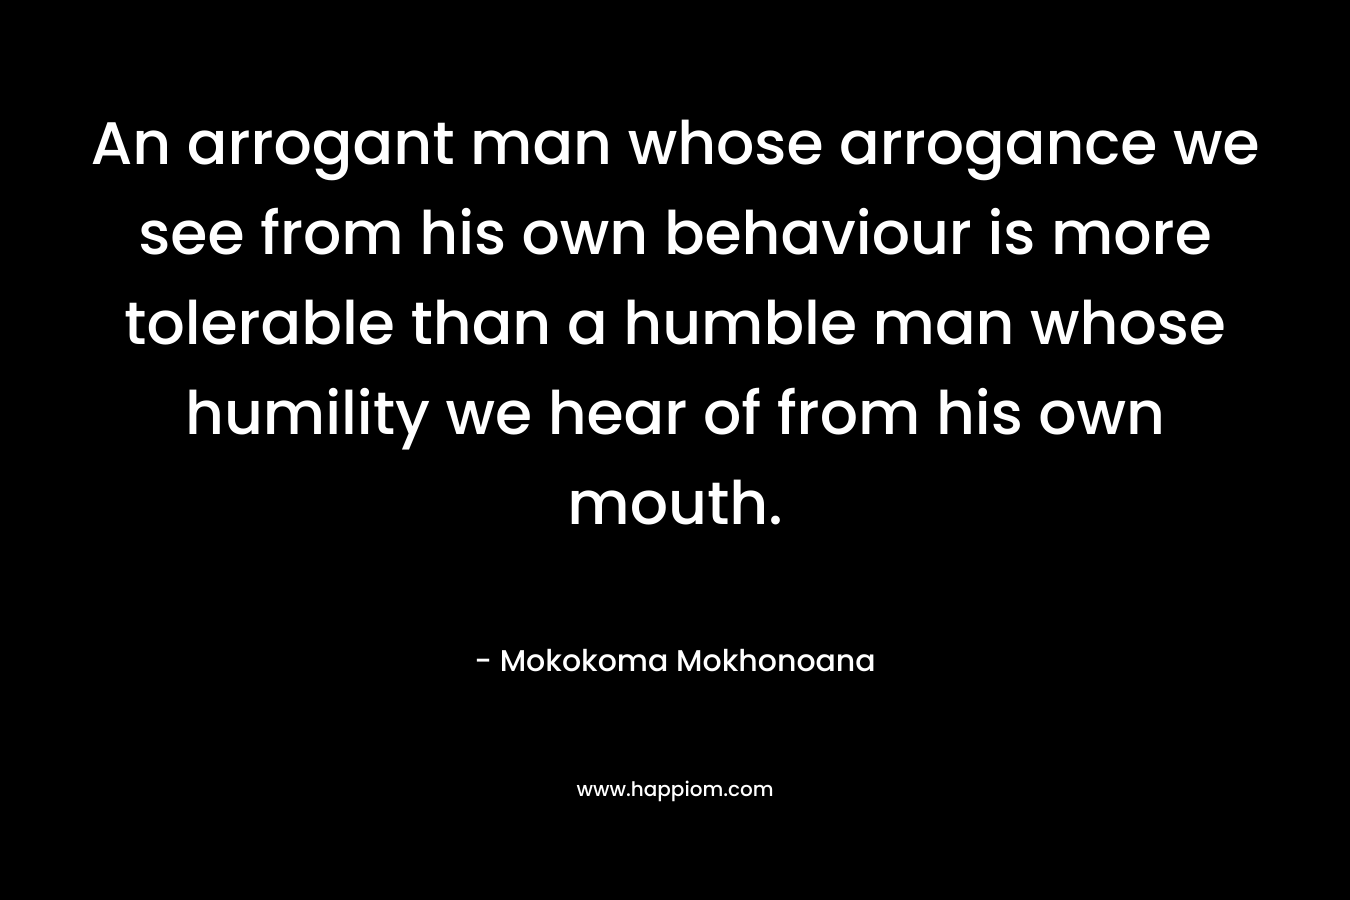 An arrogant man whose arrogance we see from his own behaviour is more tolerable than a humble man whose humility we hear of from his own mouth.